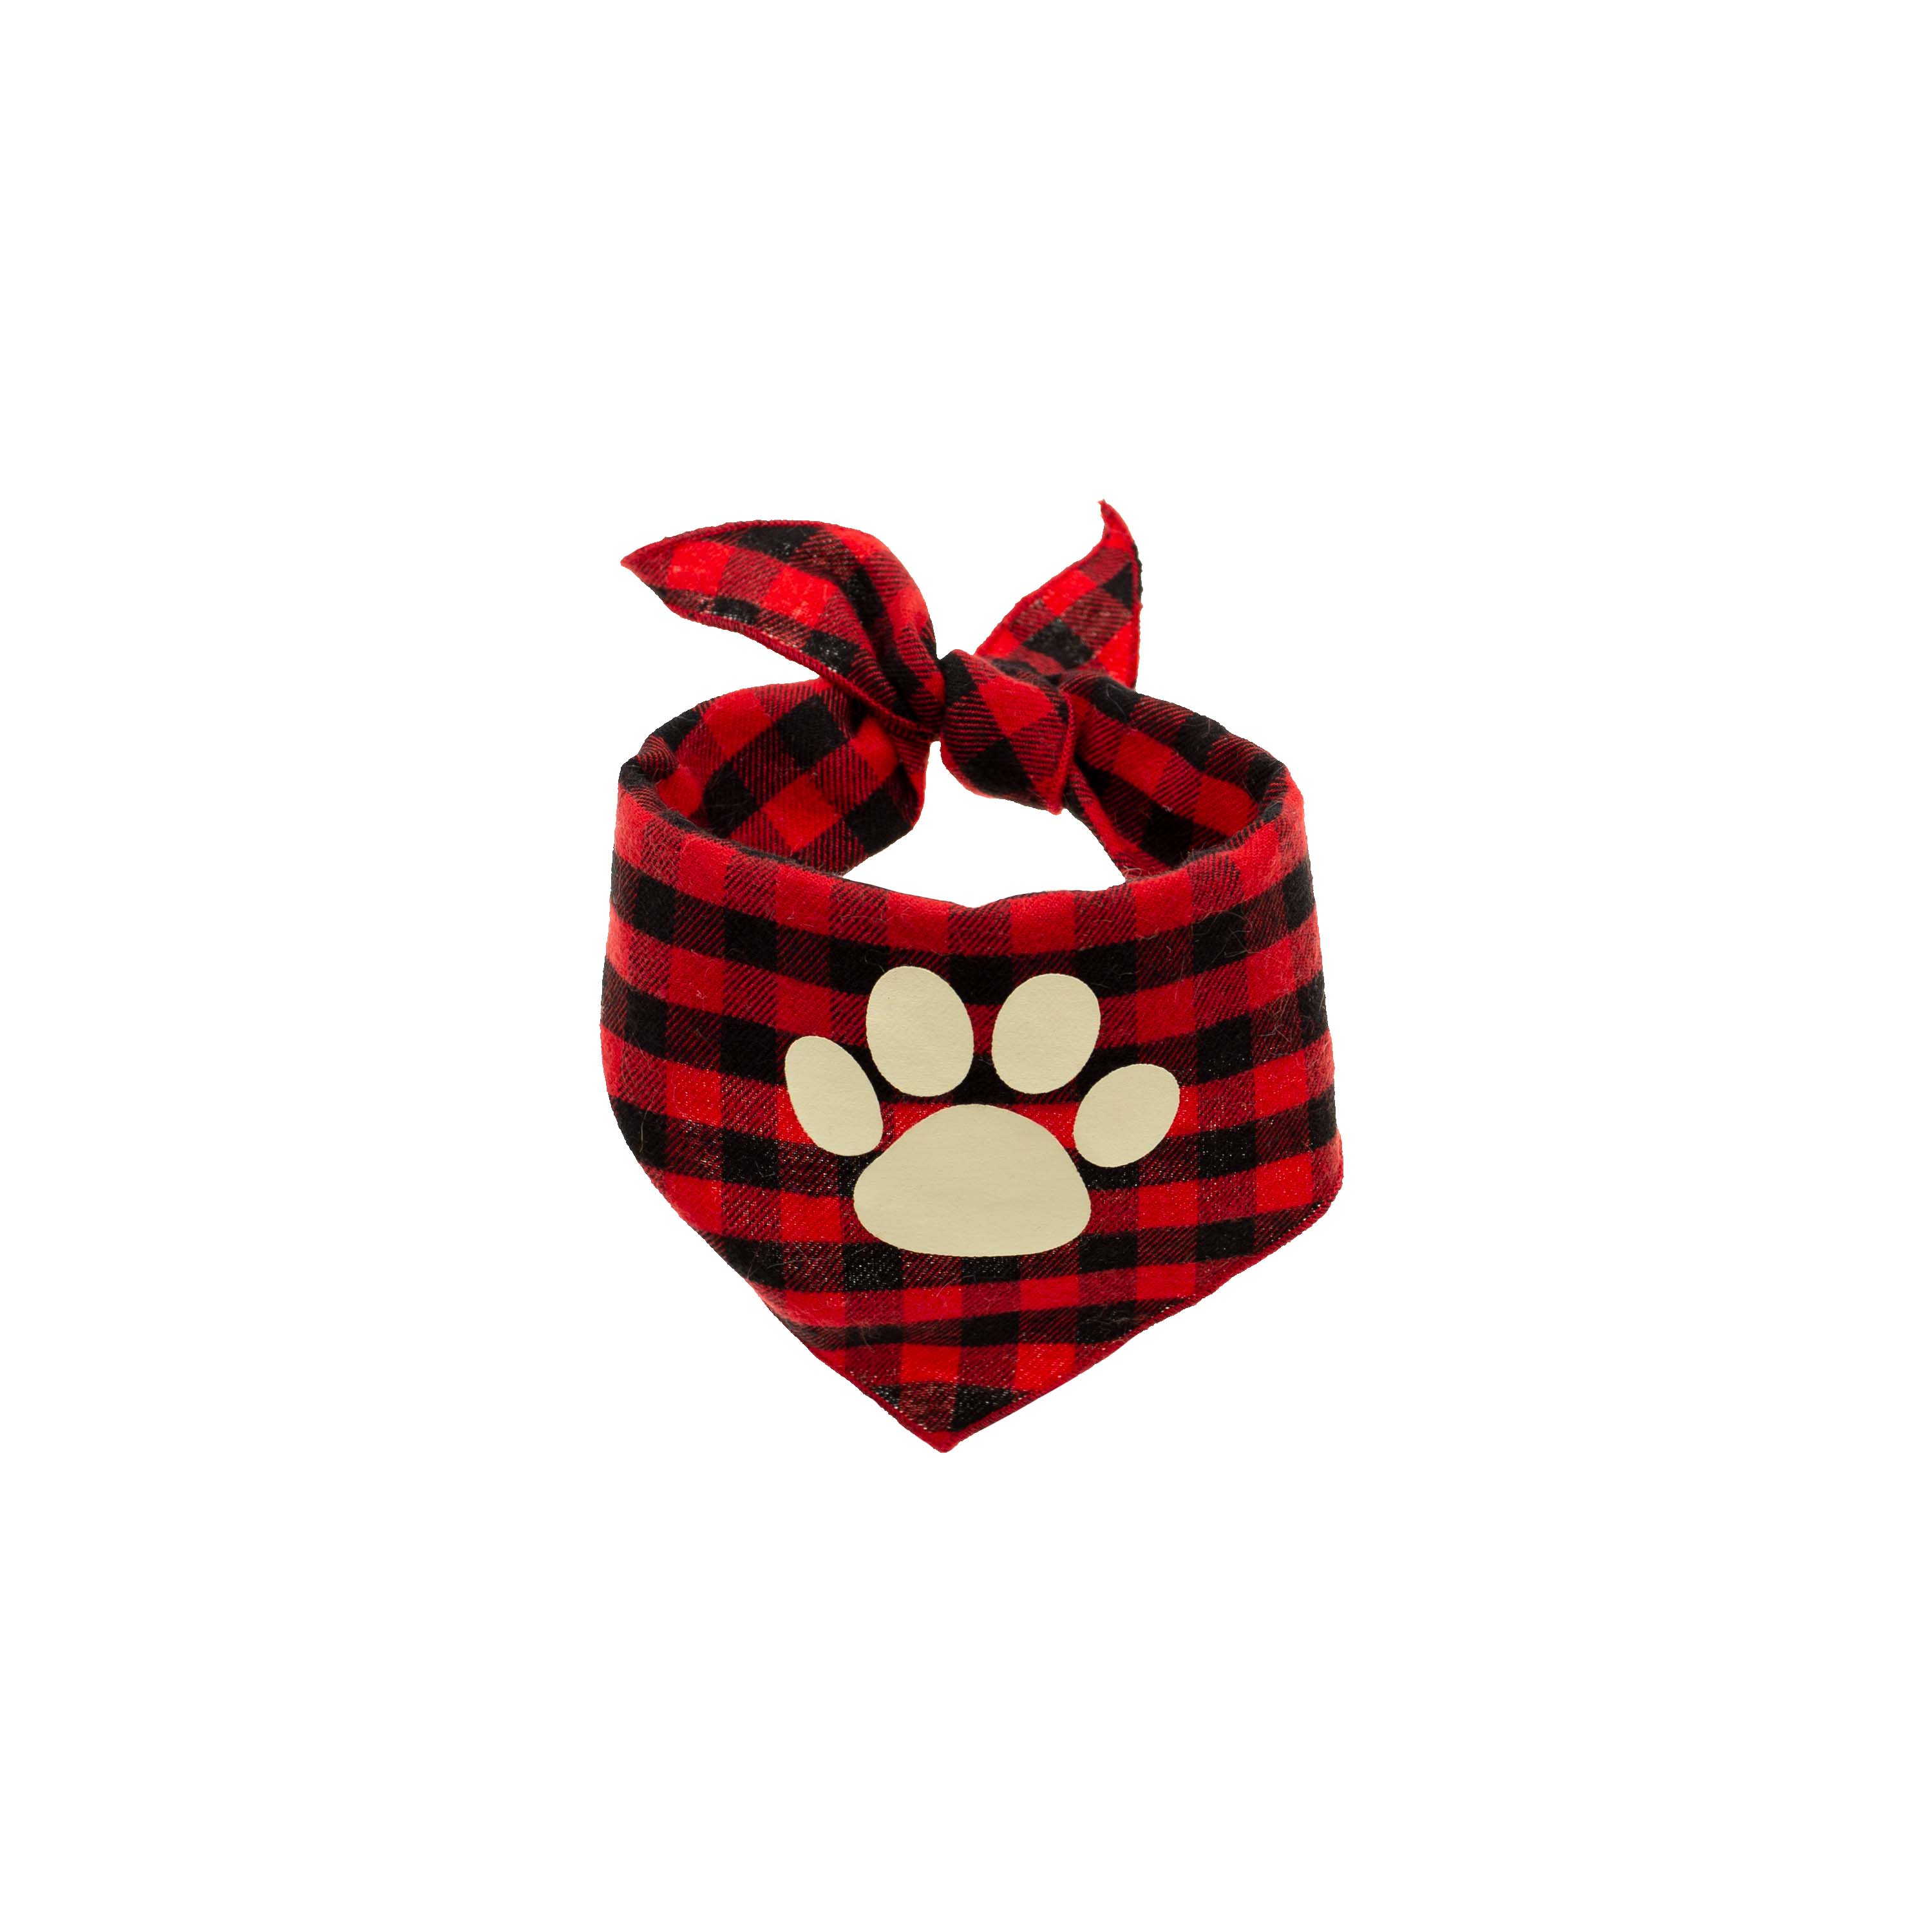 Holiday Time 4 Piece Dog Toy Gift Set - image 5 of 7